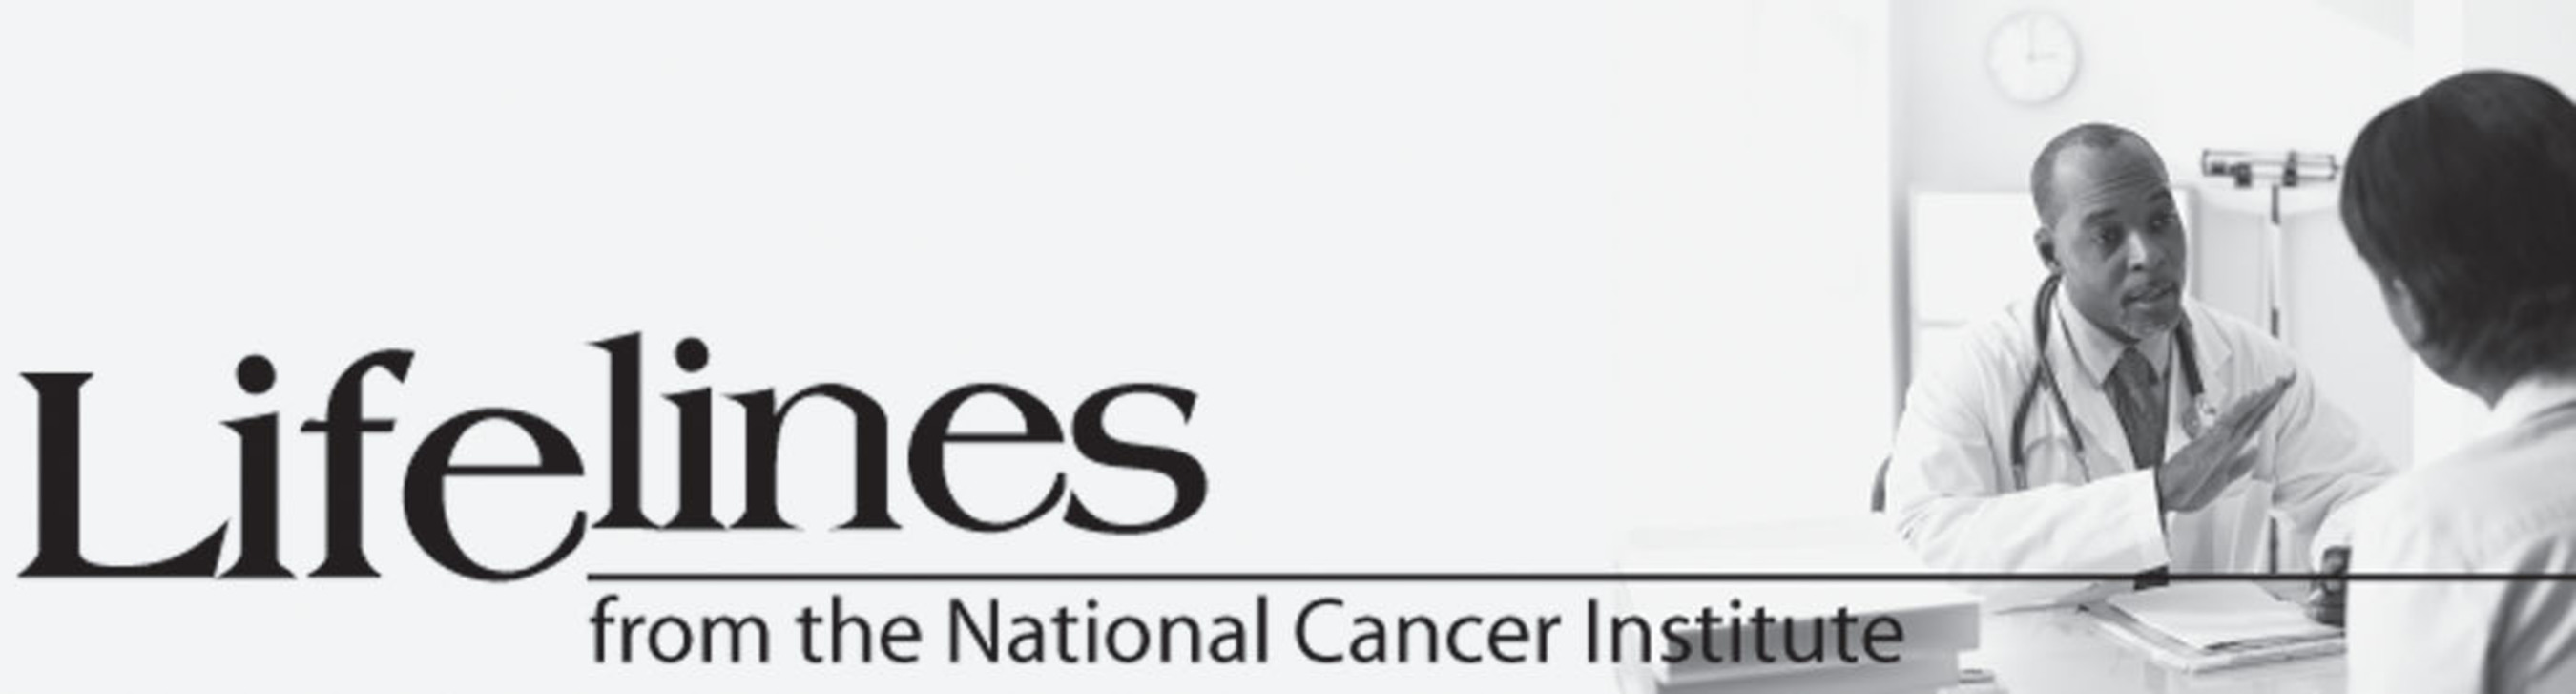 Lifelines - from the National Cancer Institute. (PRNewsFoto/National Cancer Institute) (PRNewsFoto/)